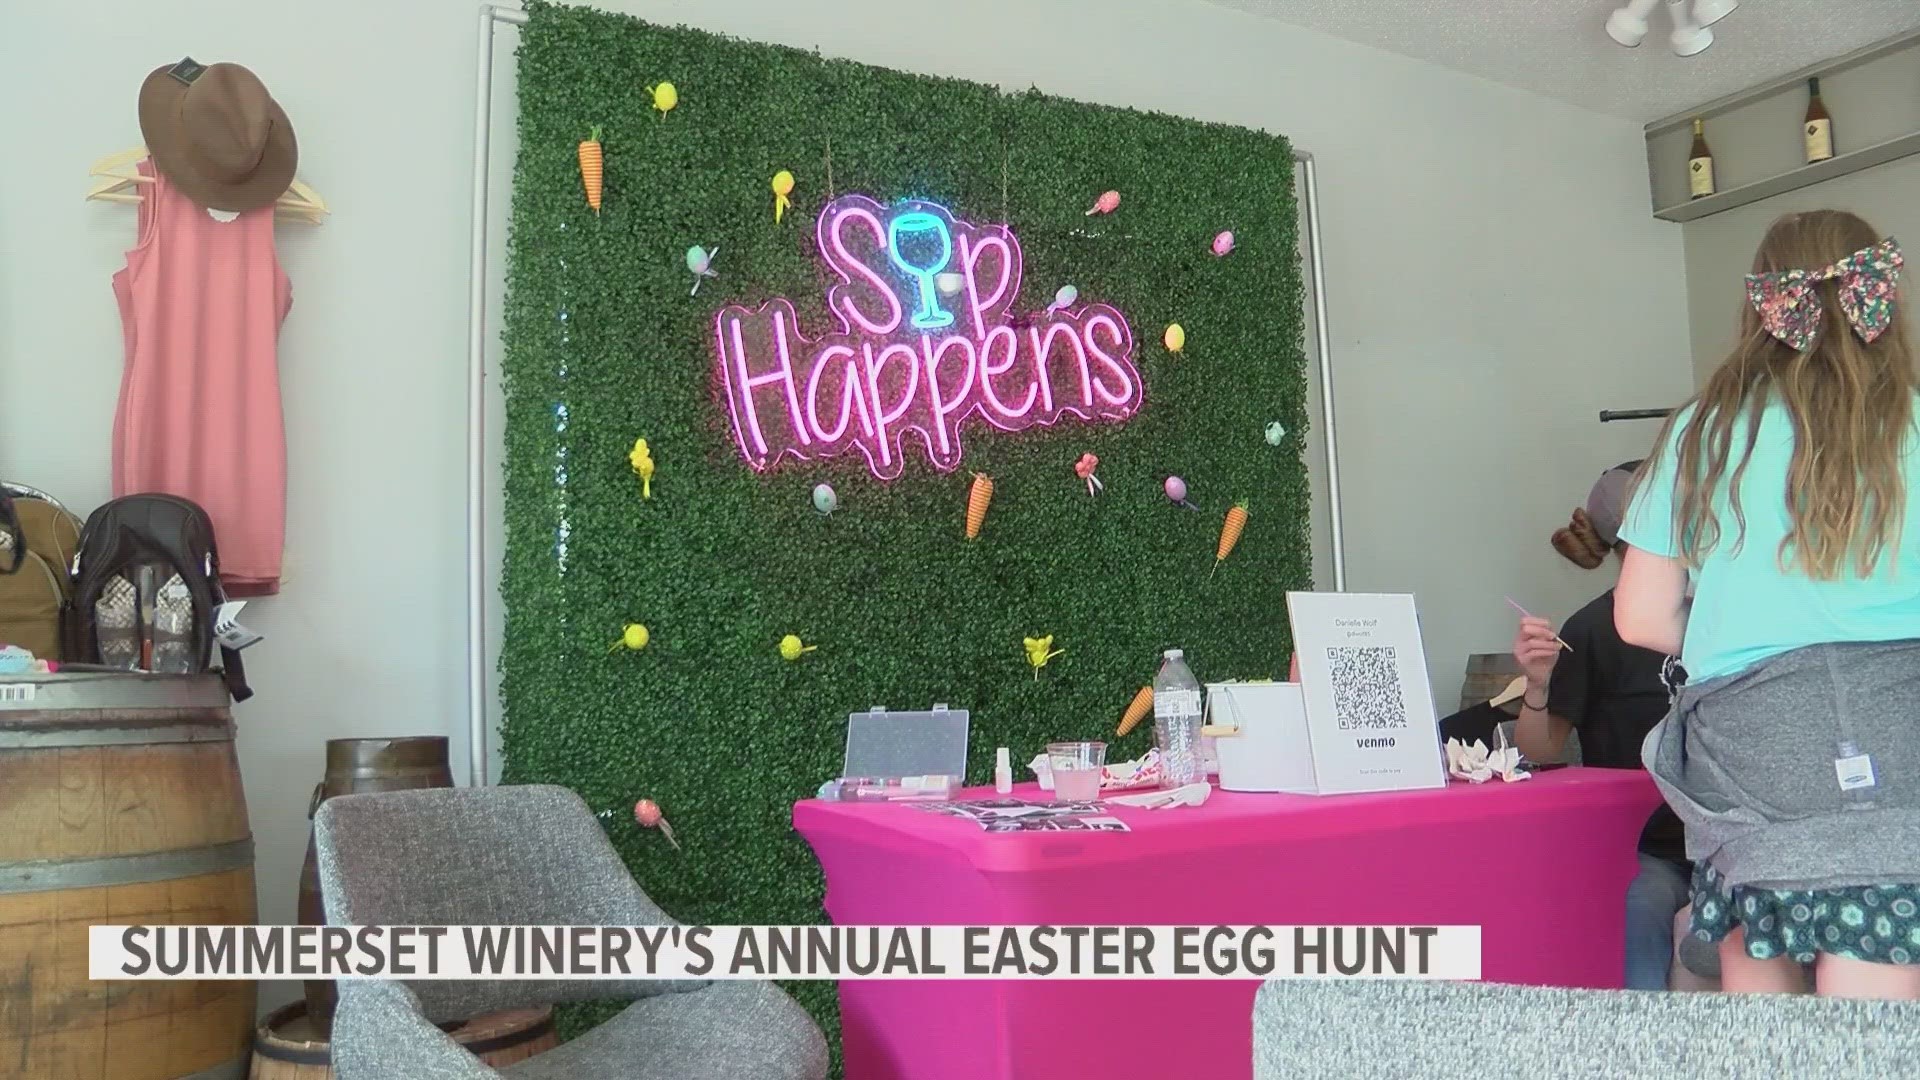 The event included egg hunts for both children and adults, with prizes ranging from stickers to a nice bottle of wine.